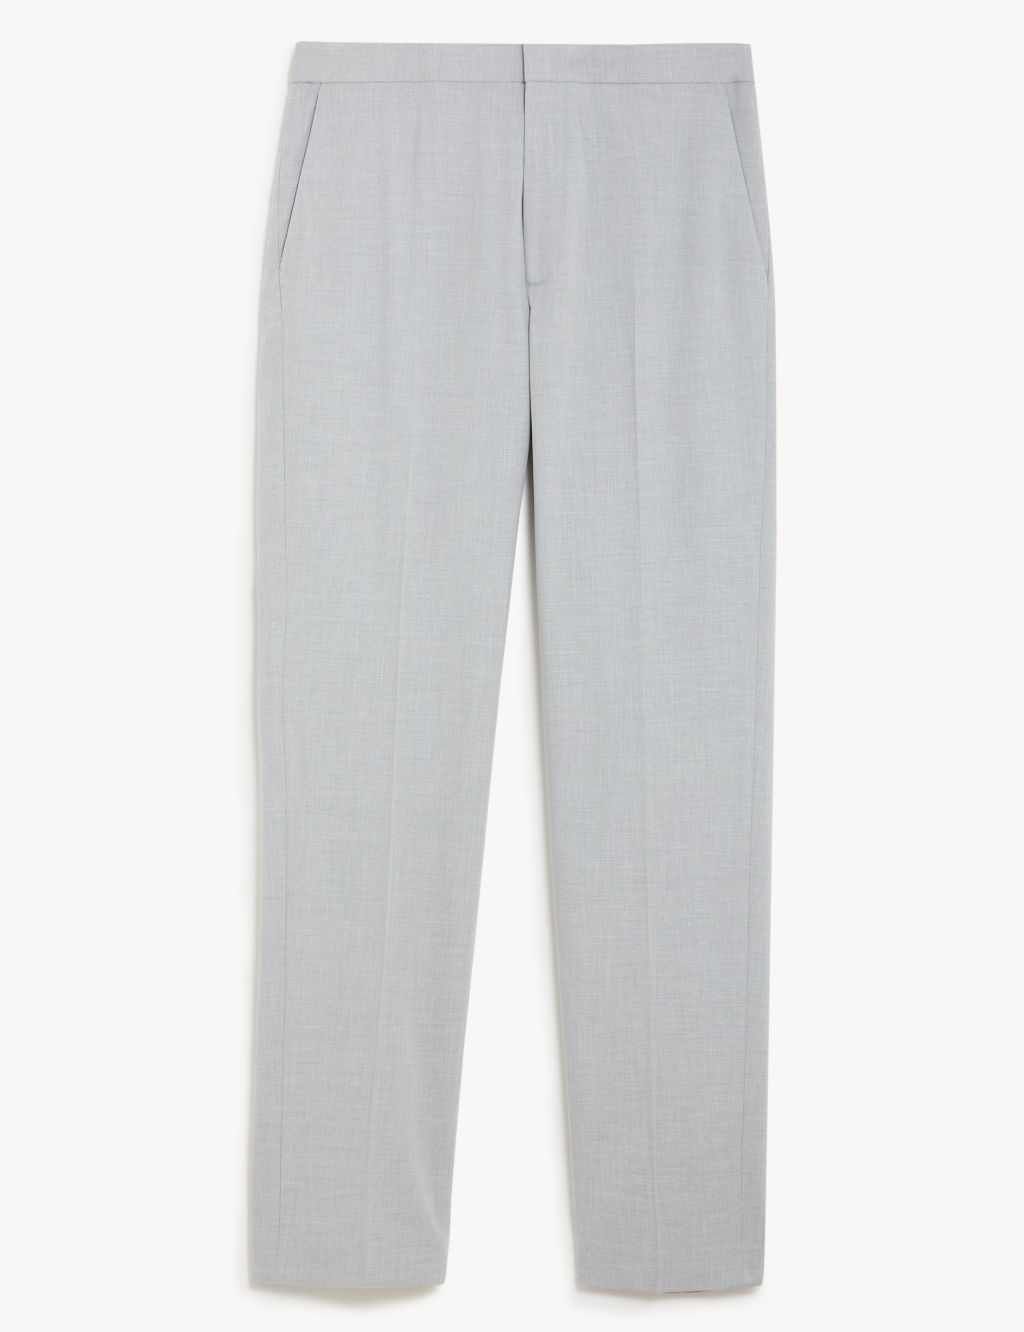 Textured 360 Flex Trousers image 6